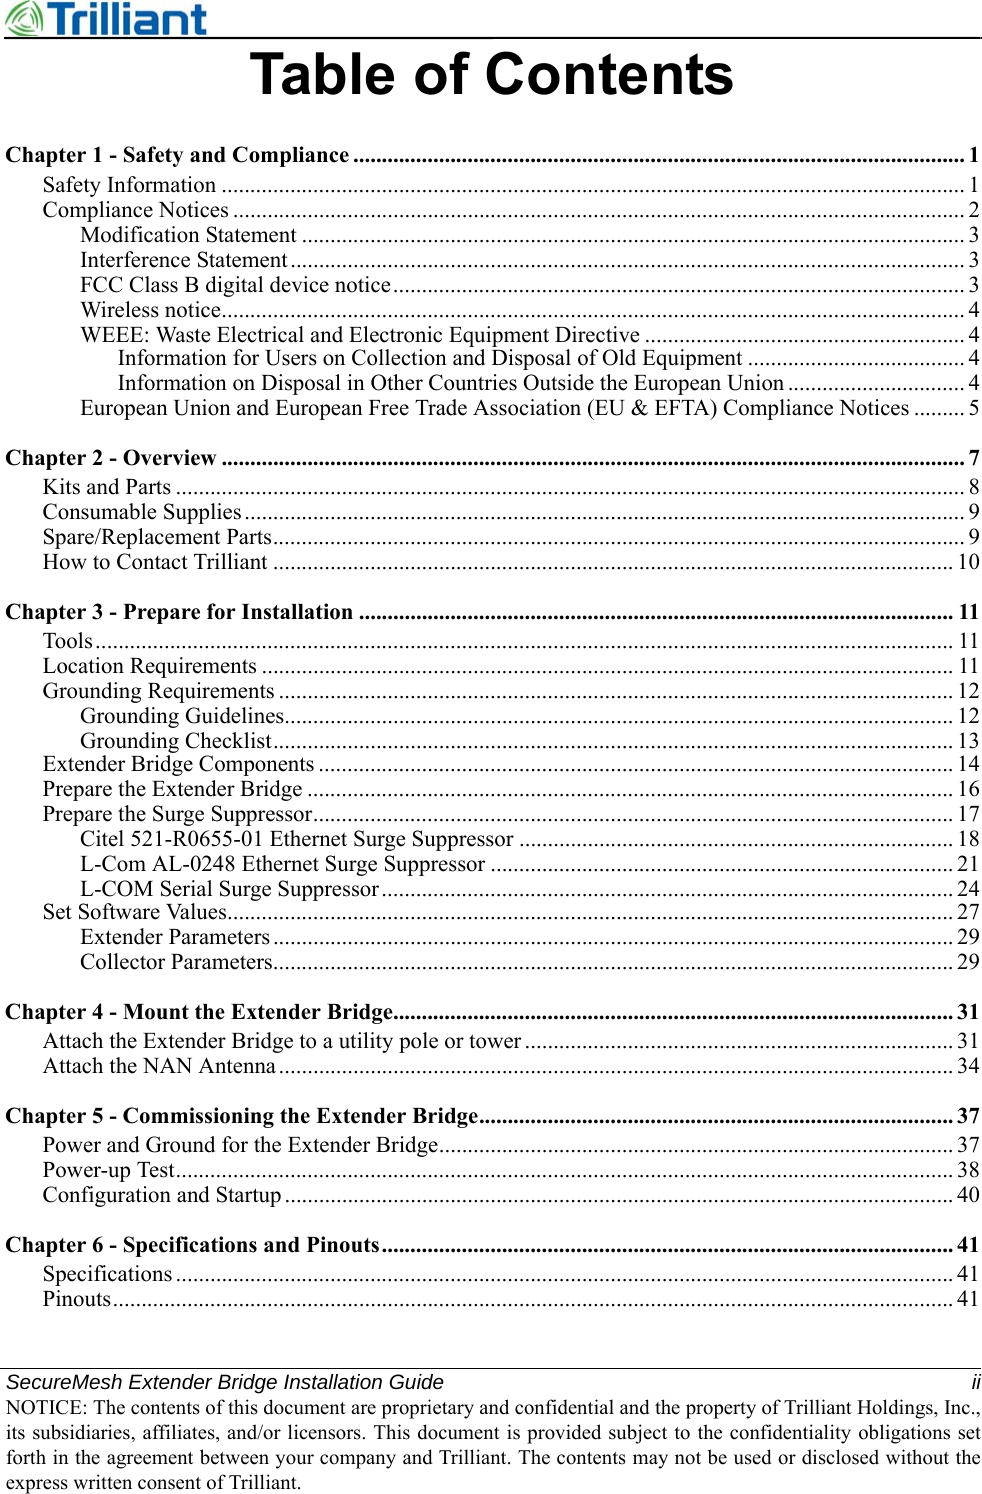 SecureMesh Extender Bridge Installation Guide iiNOTICE: The contents of this document are proprietary and confidential and the property of Trilliant Holdings, Inc.,its subsidiaries, affiliates, and/or licensors. This document is provided subject to the confidentiality obligations setforth in the agreement between your company and Trilliant. The contents may not be used or disclosed without theexpress written consent of Trilliant.Table of ContentsChapter 1 - Safety and Compliance ........................................................................................................... 1Safety Information .................................................................................................................................. 1Compliance Notices ................................................................................................................................ 2Modification Statement .................................................................................................................... 3Interference Statement...................................................................................................................... 3FCC Class B digital device notice.................................................................................................... 3Wireless notice.................................................................................................................................. 4WEEE: Waste Electrical and Electronic Equipment Directive ........................................................ 4Information for Users on Collection and Disposal of Old Equipment ...................................... 4Information on Disposal in Other Countries Outside the European Union ............................... 4European Union and European Free Trade Association (EU &amp; EFTA) Compliance Notices ......... 5Chapter 2 - Overview .................................................................................................................................. 7Kits and Parts .......................................................................................................................................... 8Consumable Supplies.............................................................................................................................. 9Spare/Replacement Parts......................................................................................................................... 9How to Contact Trilliant ....................................................................................................................... 10Chapter 3 - Prepare for Installation ........................................................................................................ 11Tools...................................................................................................................................................... 11Location Requirements ......................................................................................................................... 11Grounding Requirements ...................................................................................................................... 12Grounding Guidelines..................................................................................................................... 12Grounding Checklist....................................................................................................................... 13Extender Bridge Components ............................................................................................................... 14Prepare the Extender Bridge ................................................................................................................. 16Prepare the Surge Suppressor................................................................................................................ 17Citel 521-R0655-01 Ethernet Surge Suppressor ............................................................................ 18L-Com AL-0248 Ethernet Surge Suppressor ................................................................................. 21L-COM Serial Surge Suppressor.................................................................................................... 24Set Software Values............................................................................................................................... 27Extender Parameters ....................................................................................................................... 29Collector Parameters....................................................................................................................... 29Chapter 4 - Mount the Extender Bridge.................................................................................................. 31Attach the Extender Bridge to a utility pole or tower ........................................................................... 31Attach the NAN Antenna...................................................................................................................... 34Chapter 5 - Commissioning the Extender Bridge................................................................................... 37Power and Ground for the Extender Bridge.......................................................................................... 37Power-up Test........................................................................................................................................ 38Configuration and Startup ..................................................................................................................... 40Chapter 6 - Specifications and Pinouts.................................................................................................... 41Specifications ........................................................................................................................................ 41Pinouts................................................................................................................................................... 41